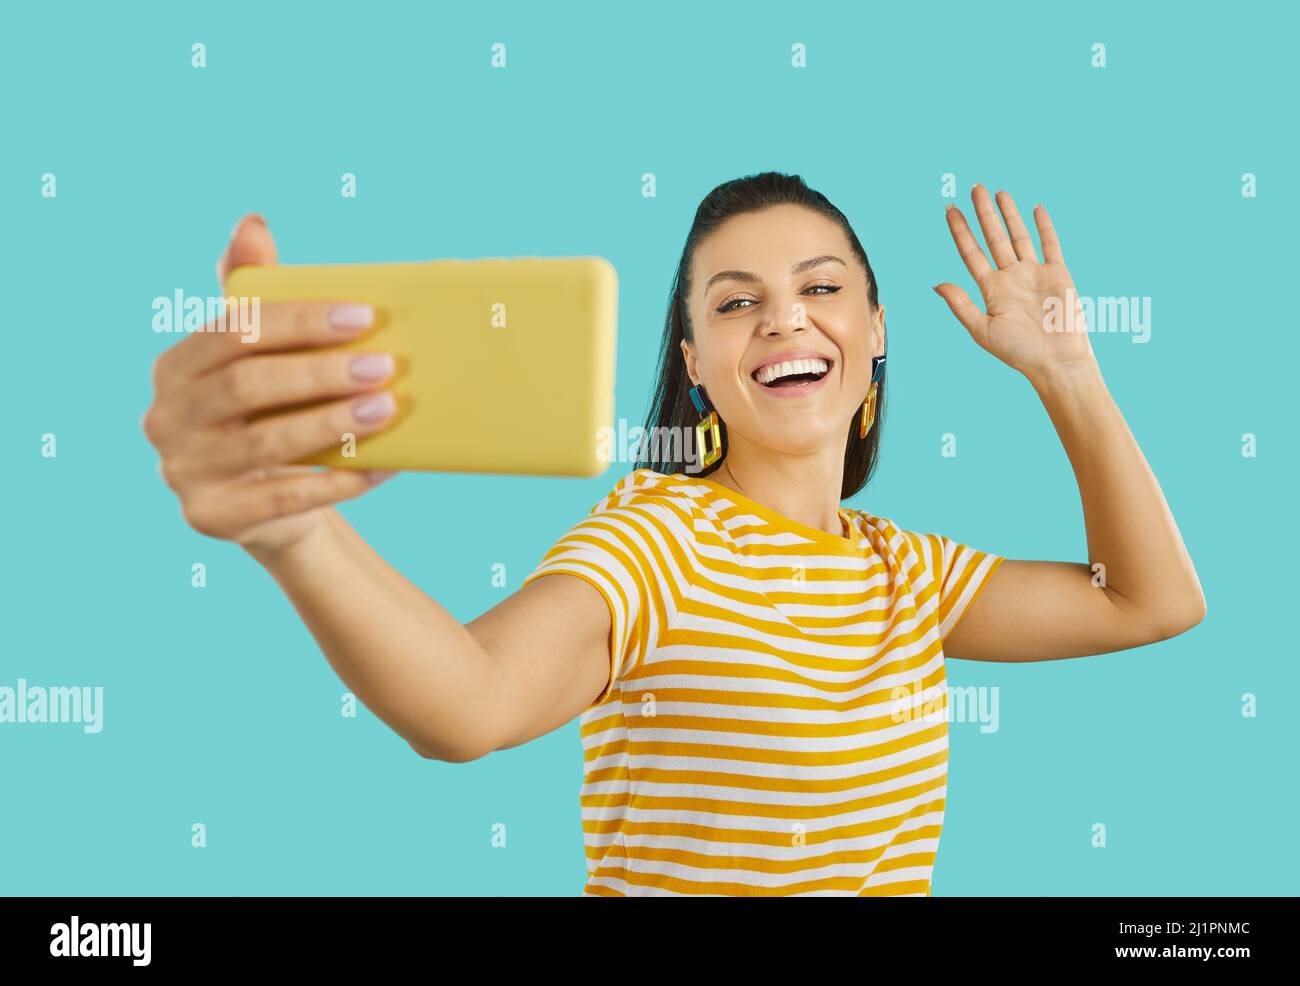 Happy woman taking selfie or making video call on phone, waving hello and smiling Stock Photo